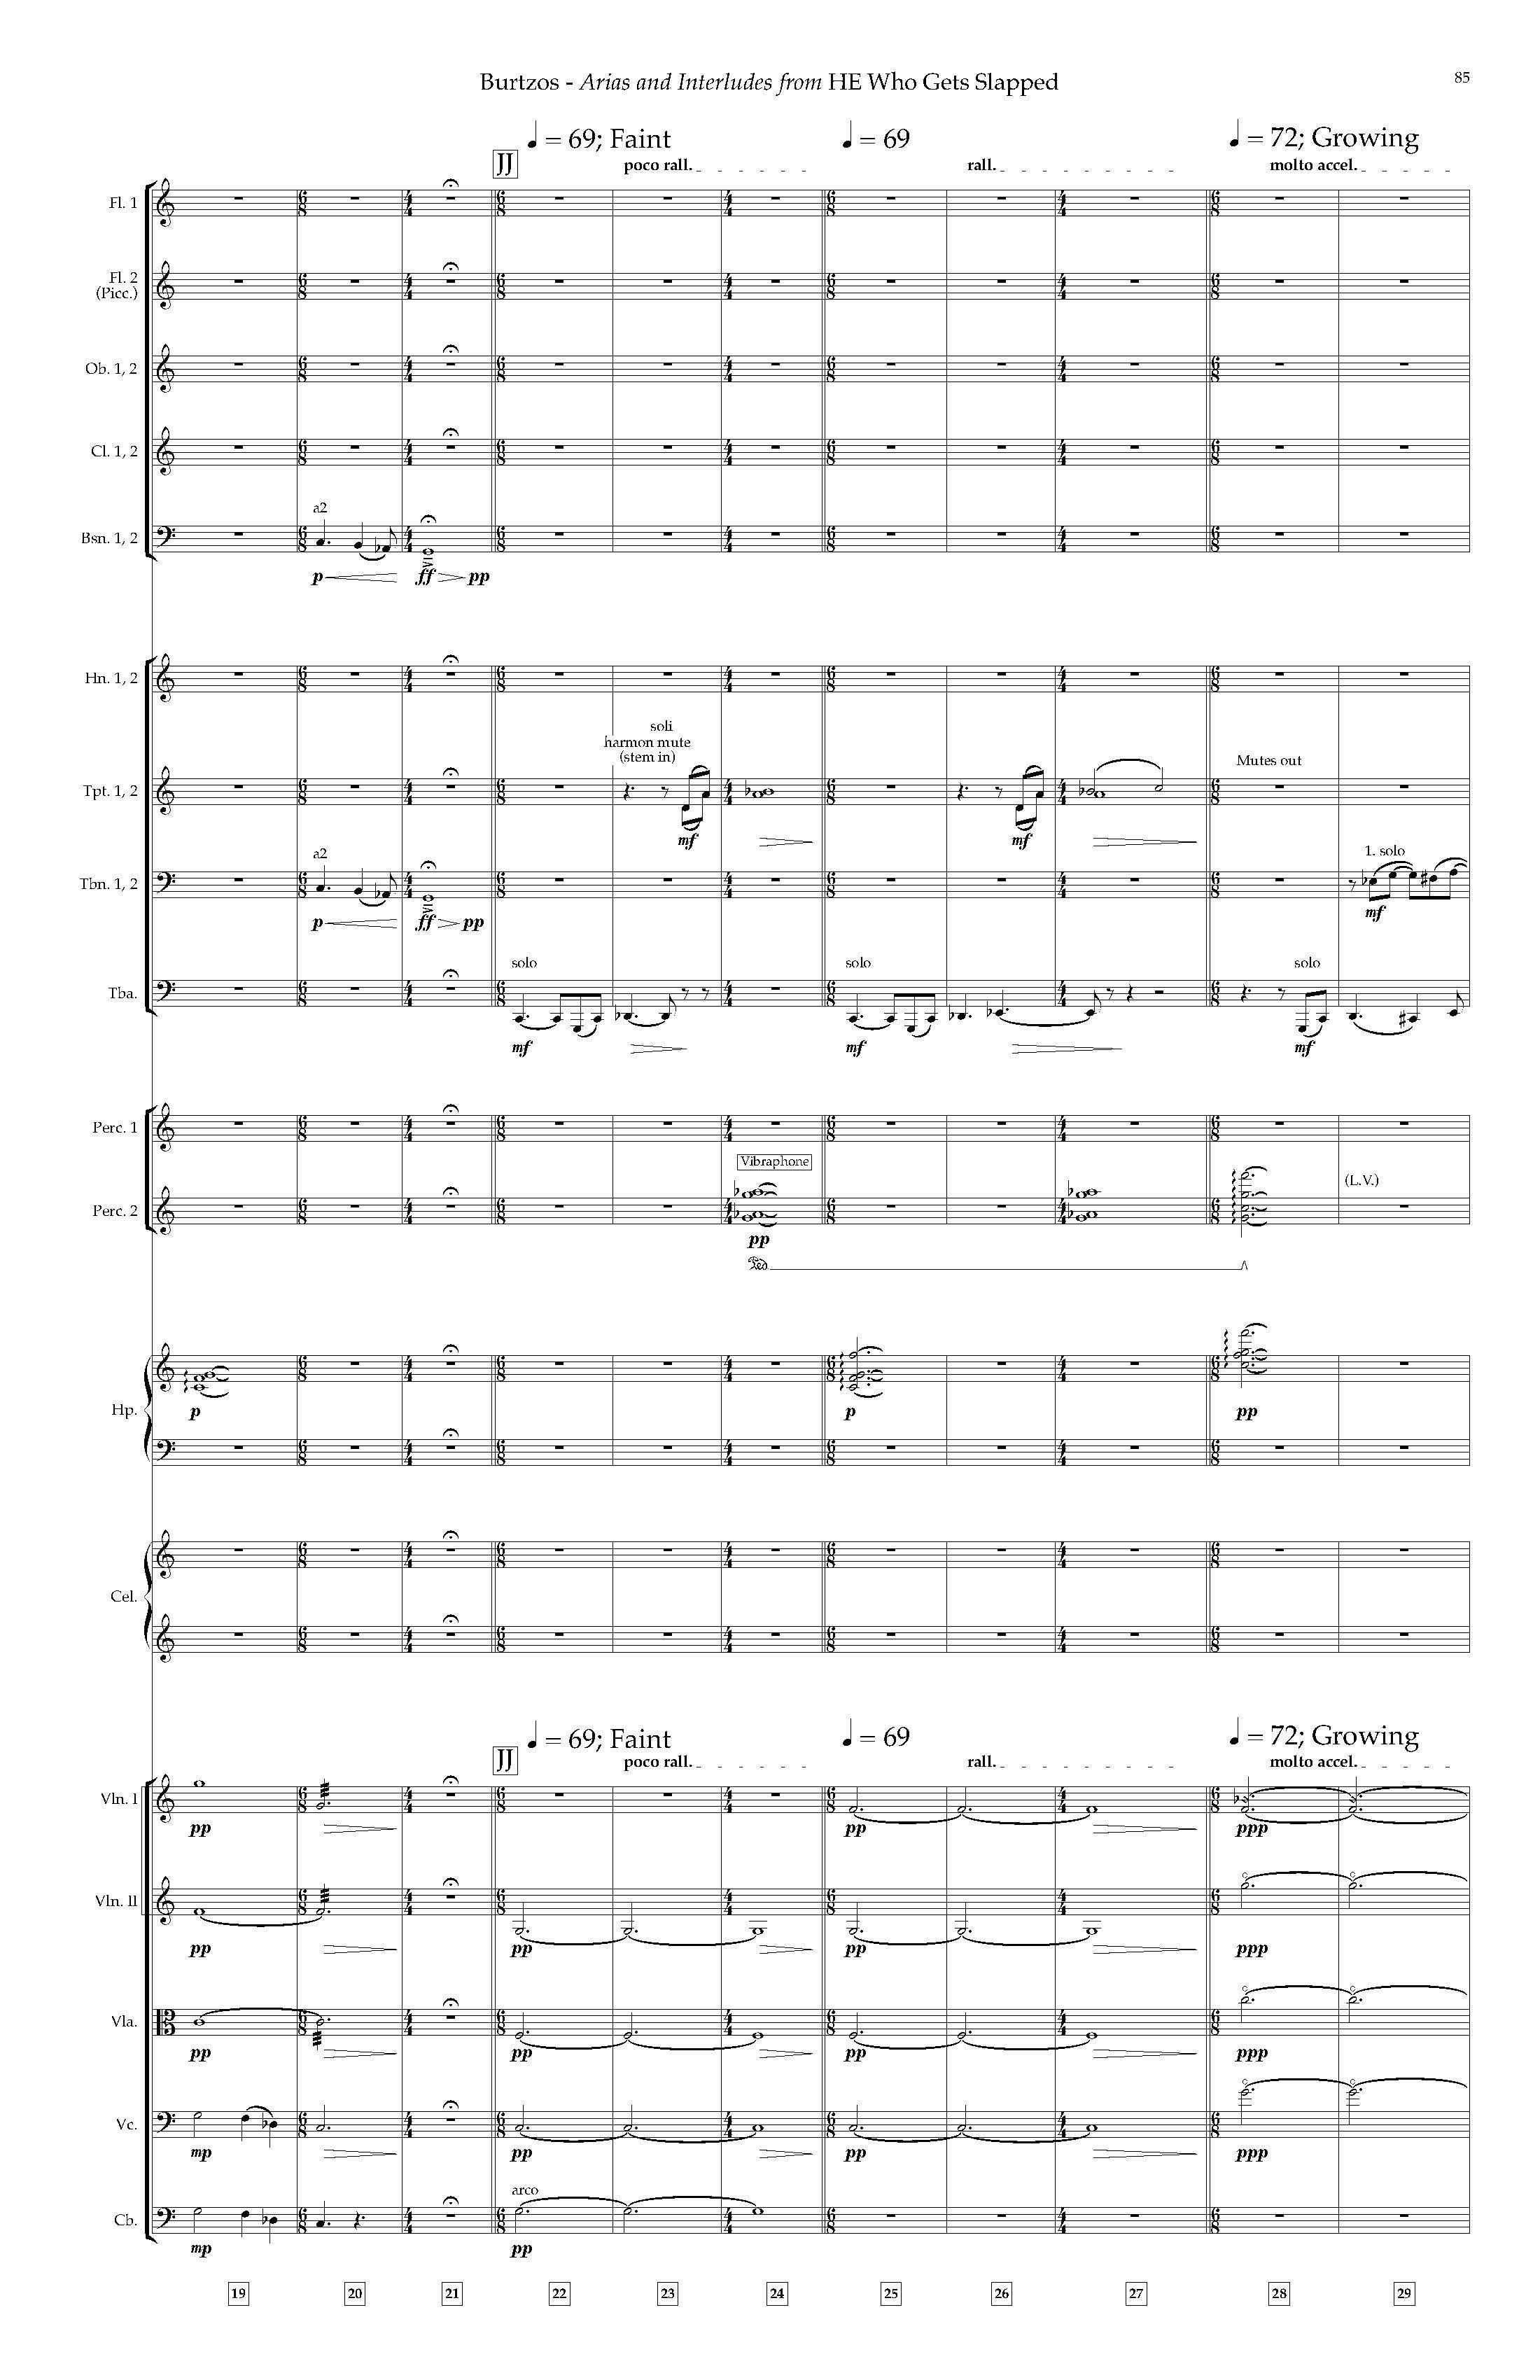 Arias and Interludes from HWGS - Complete Score_Page_91.jpg